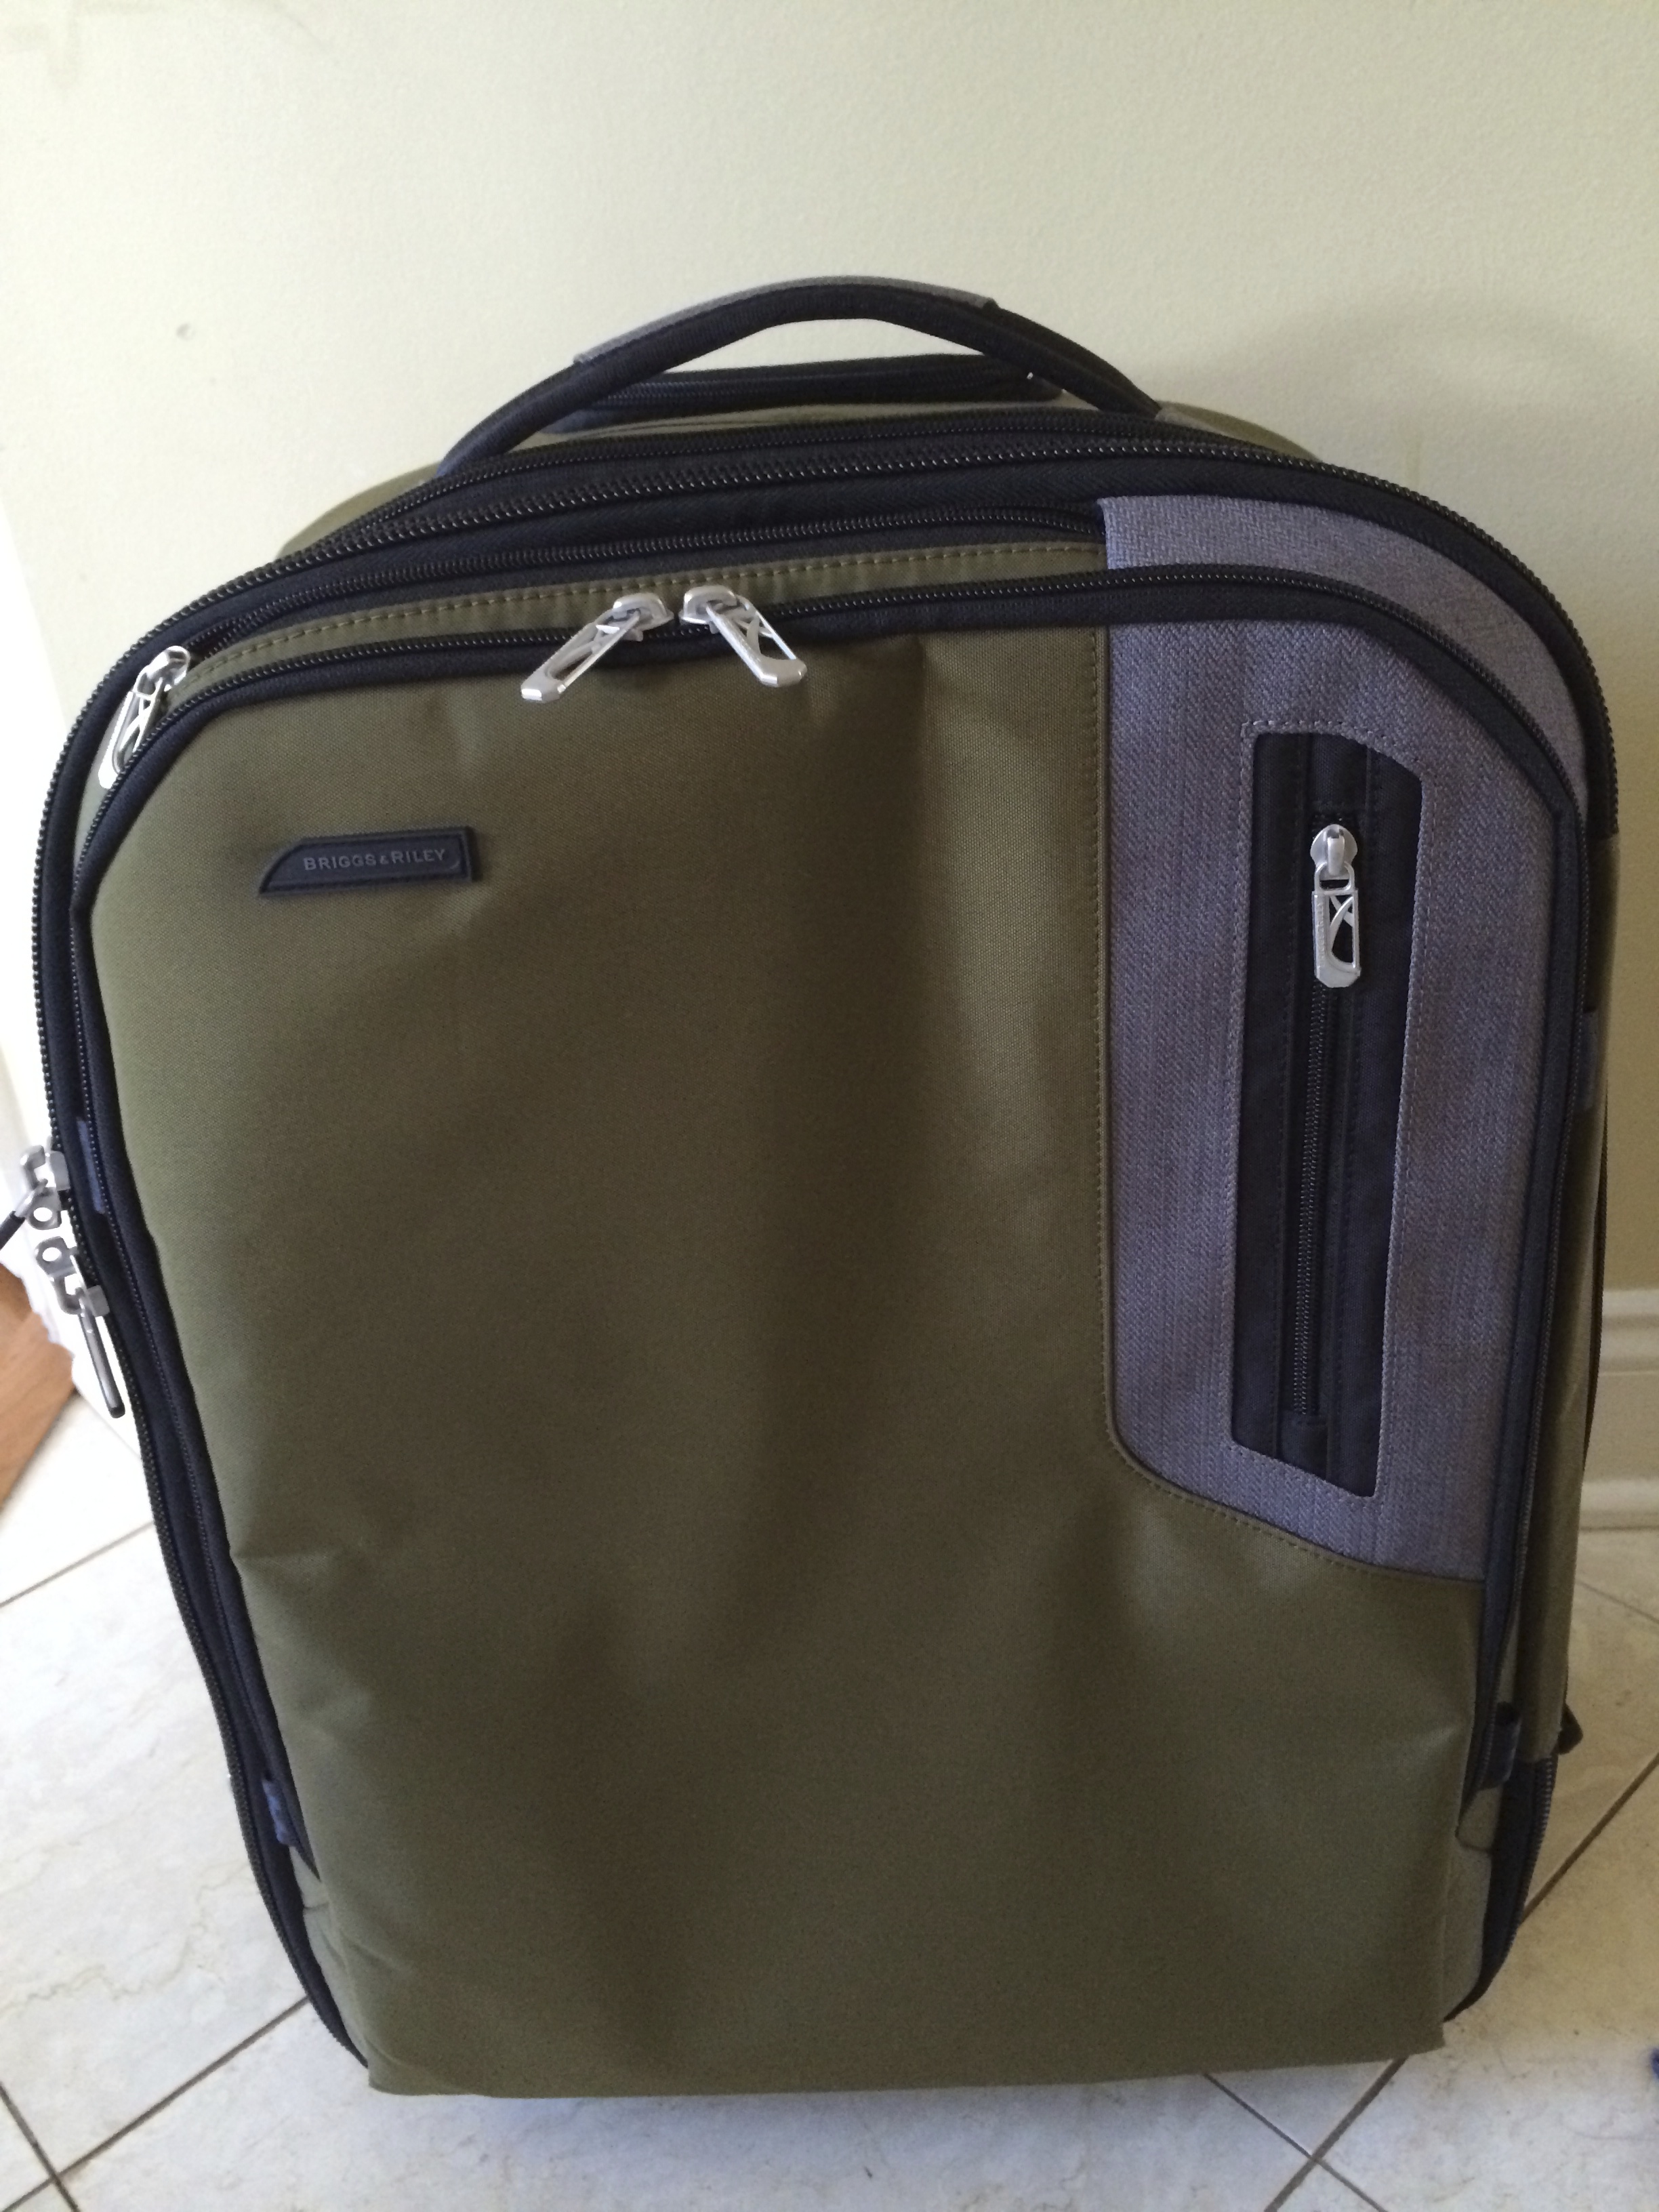 a green and grey suitcase